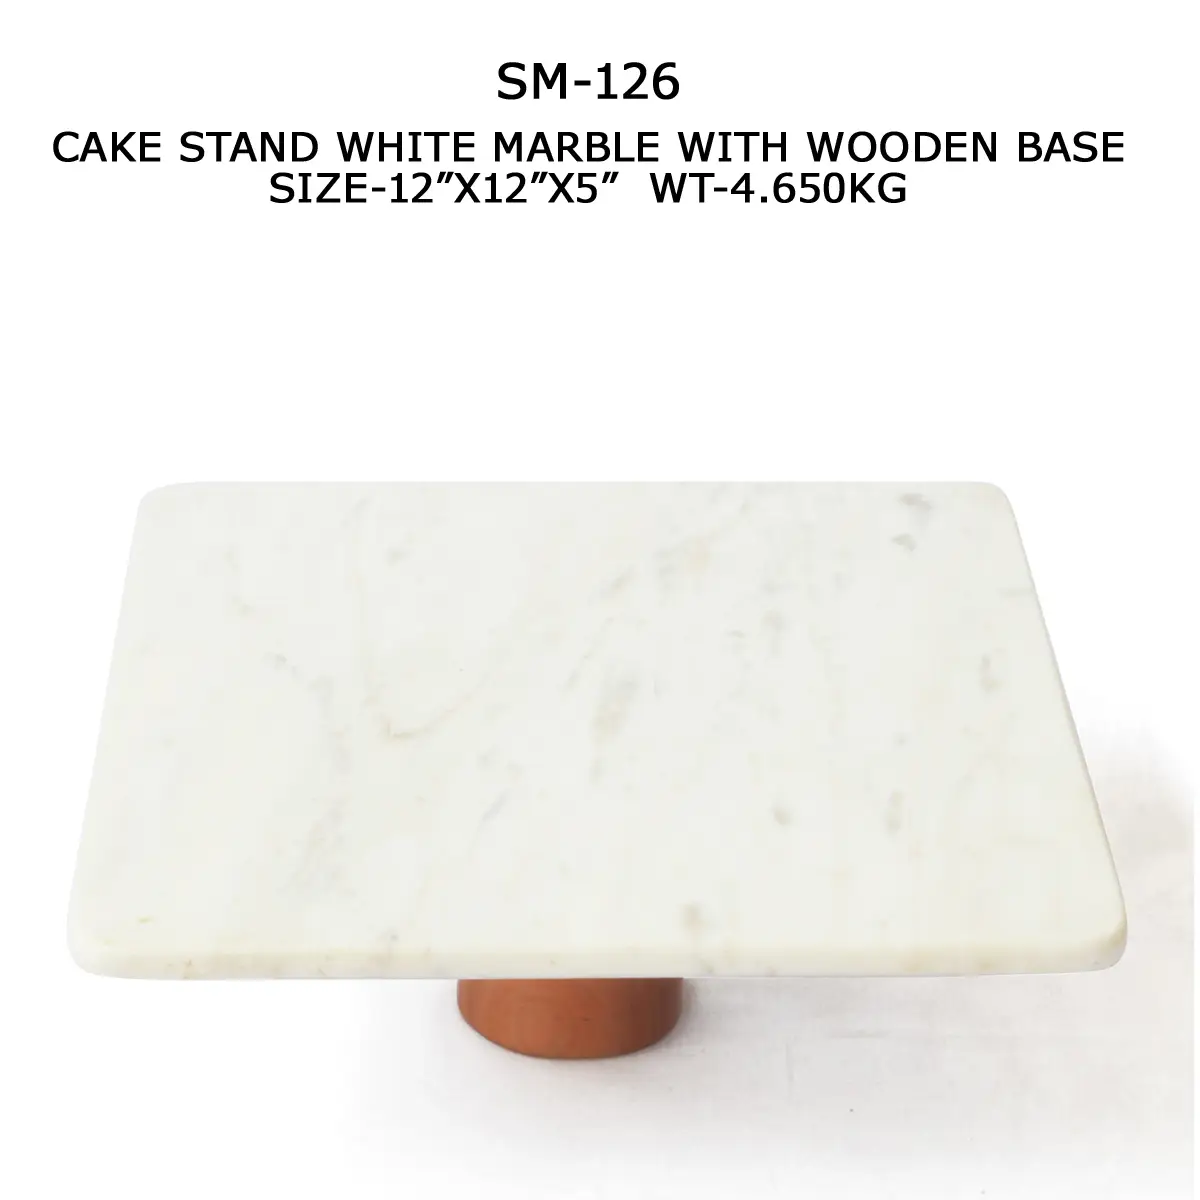 CAKE STAND WHITE MARBLE WITH WOODEN BASE